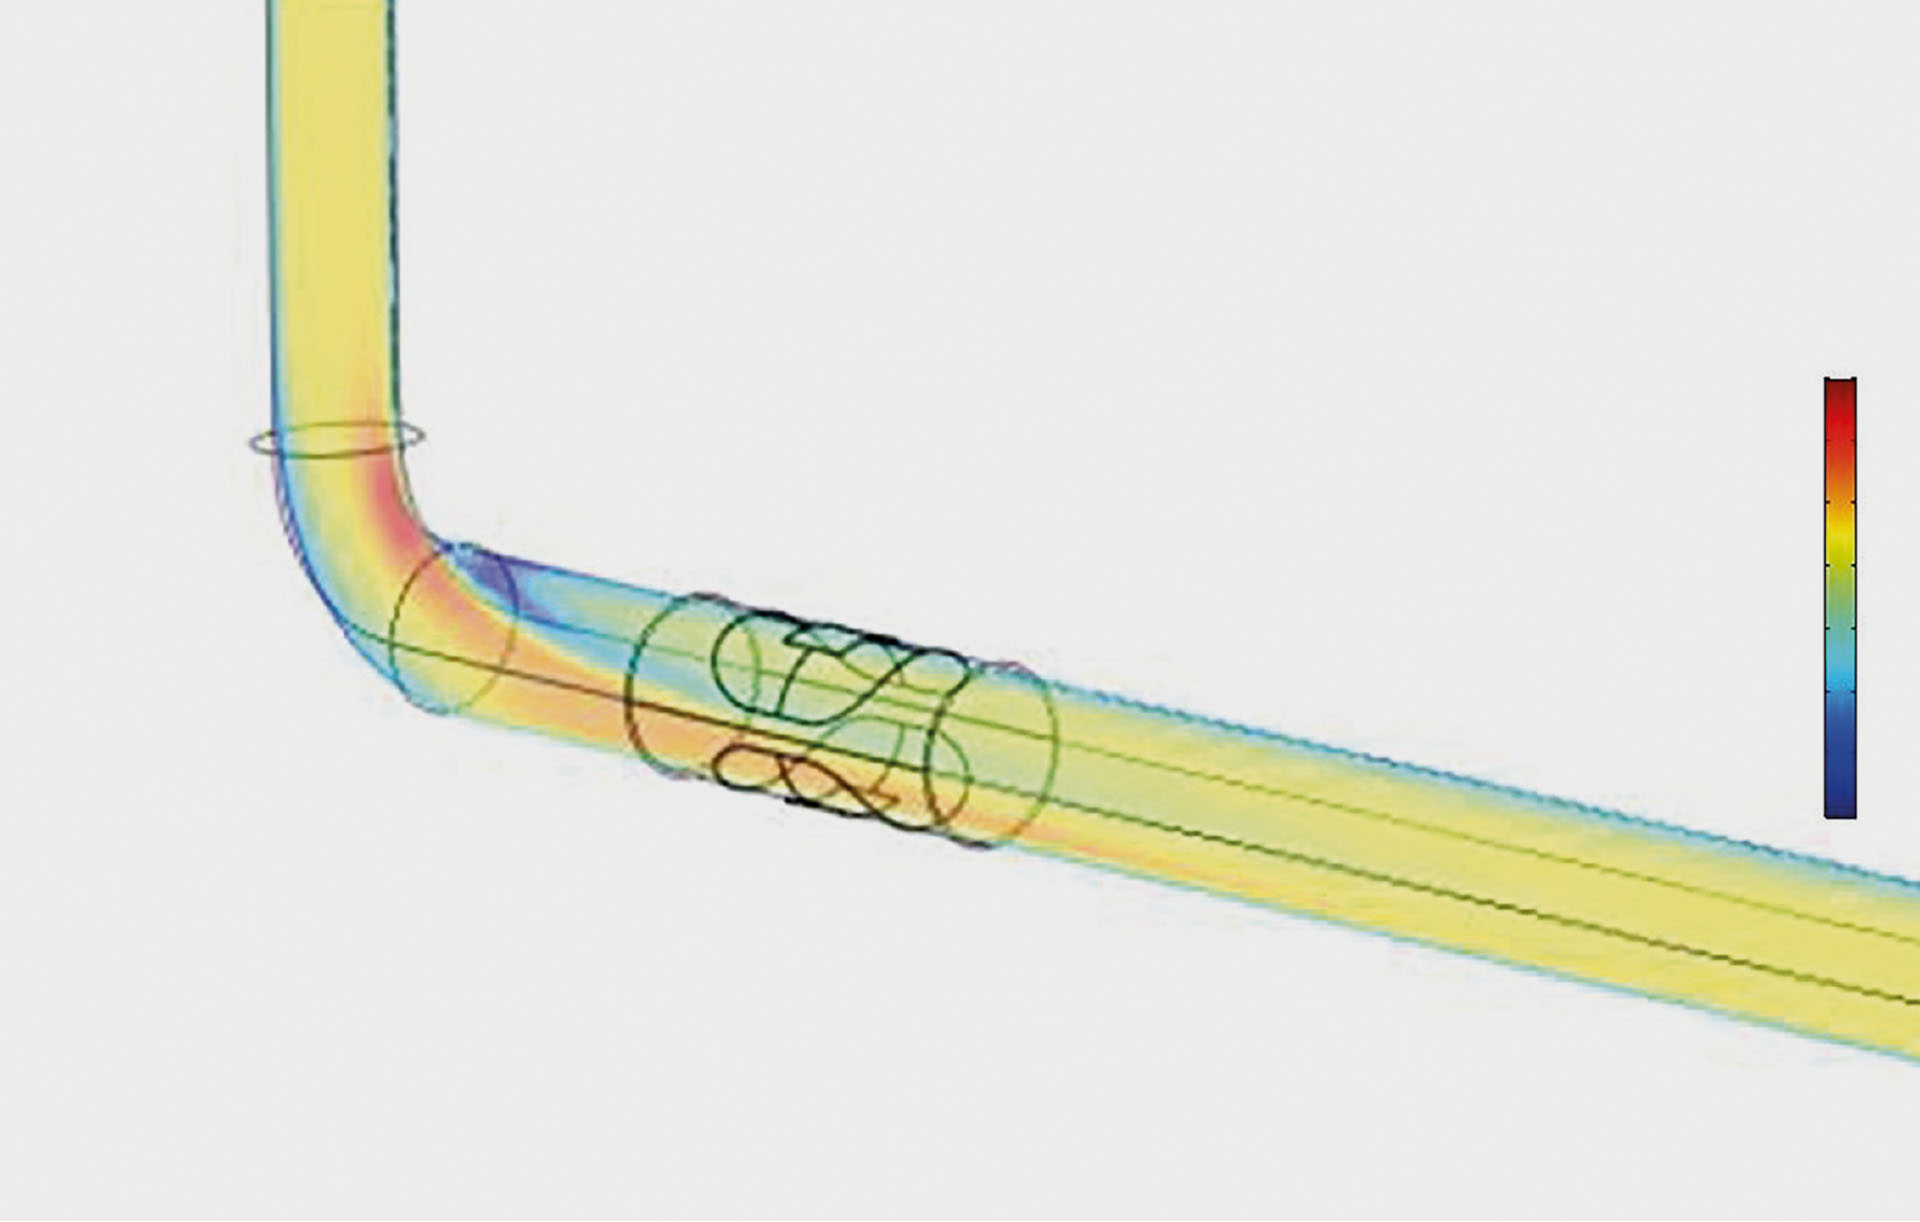 electromagnetic flowmeter modelling distorted flow conditions